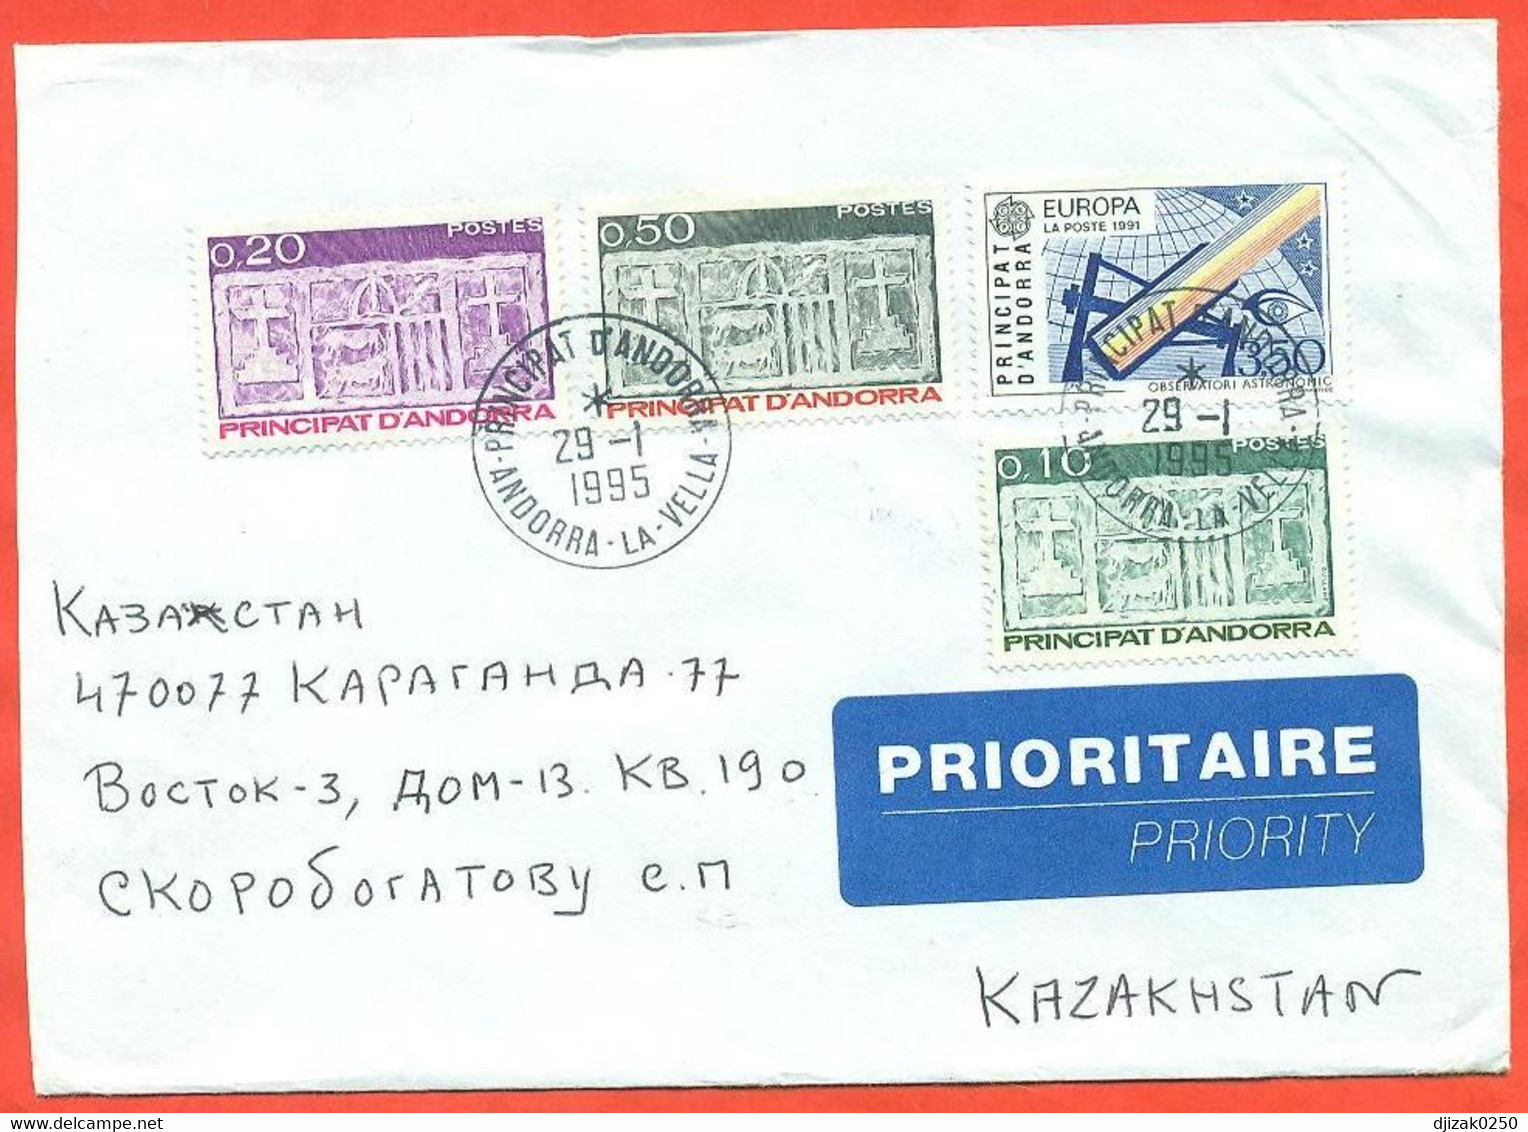 Andorra 1995. The Envelope Passed Through The Mail. Airmail. - Covers & Documents